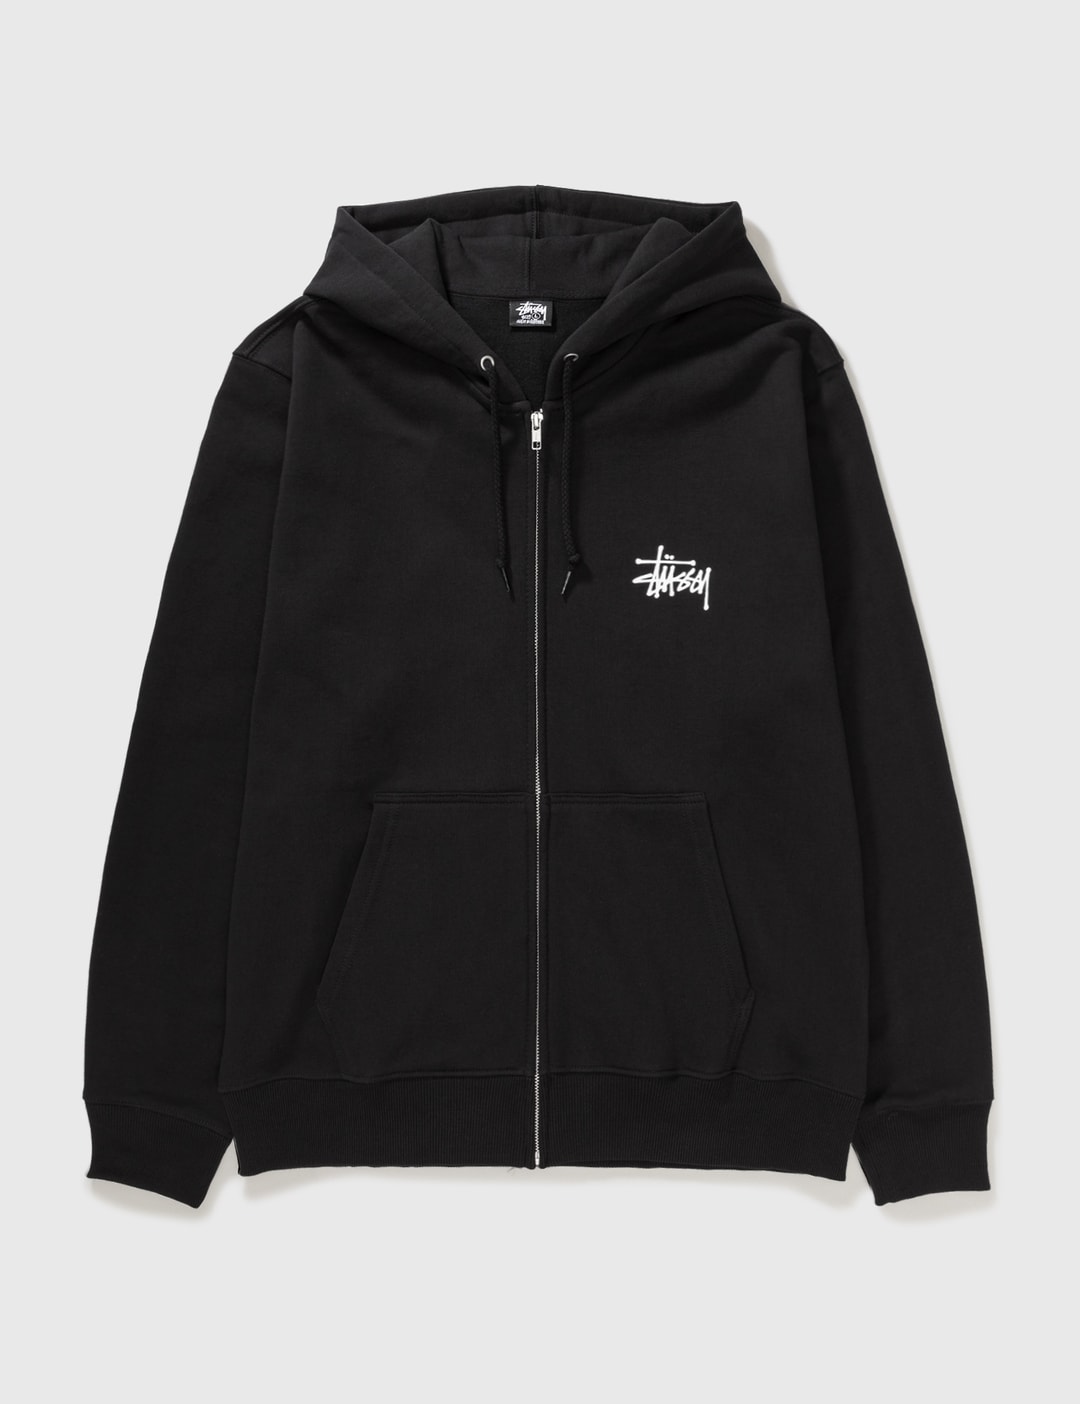 Stüssy - Basic Stussy Zip Hoodie | HBX - Globally Curated Fashion and ...